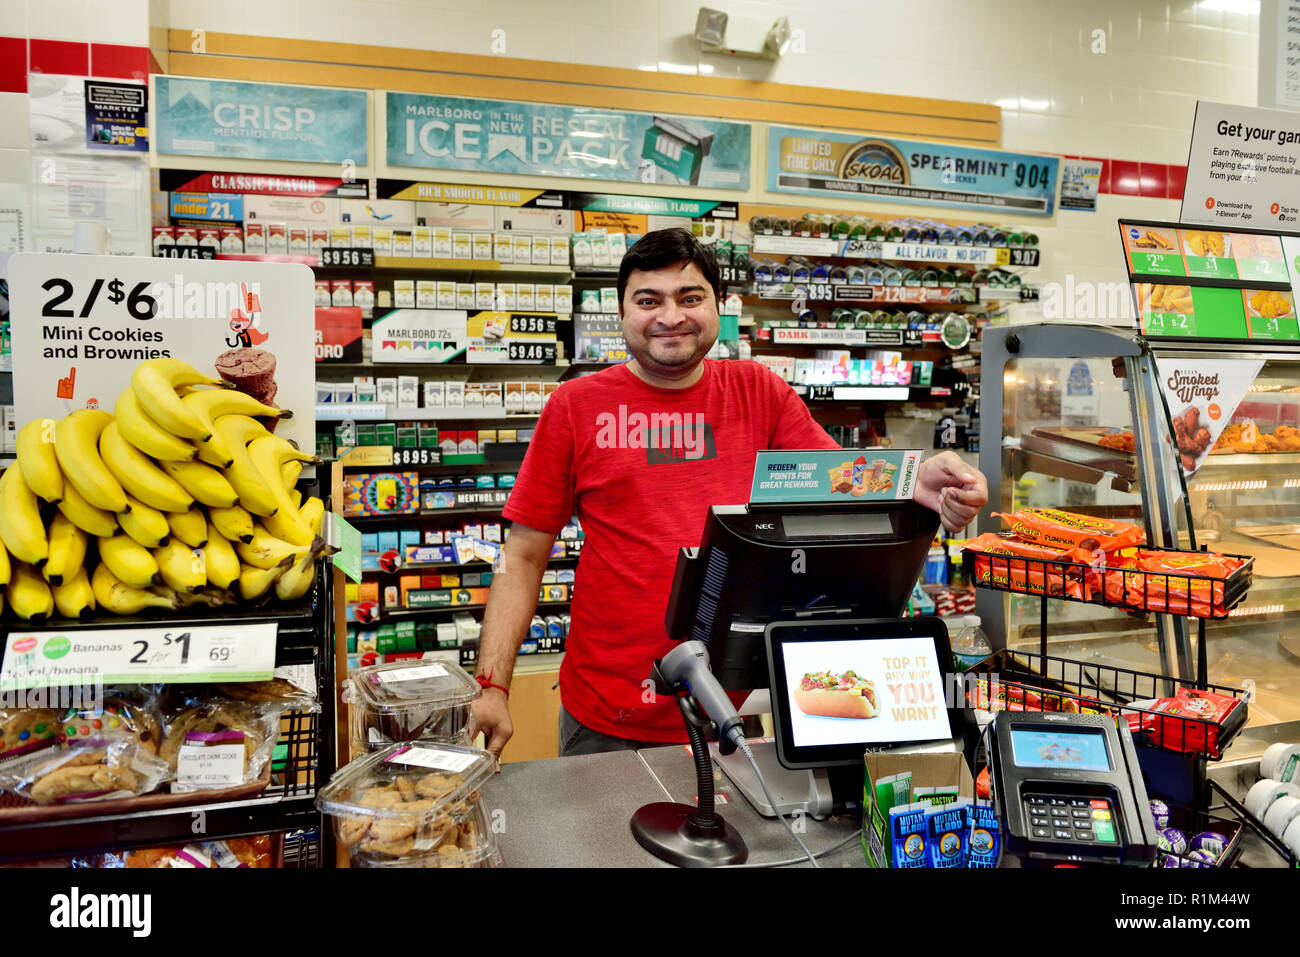 checkout-and-cashier-at-counter-in-7-eleven-convenience-store-usa-R1M44W.jpg